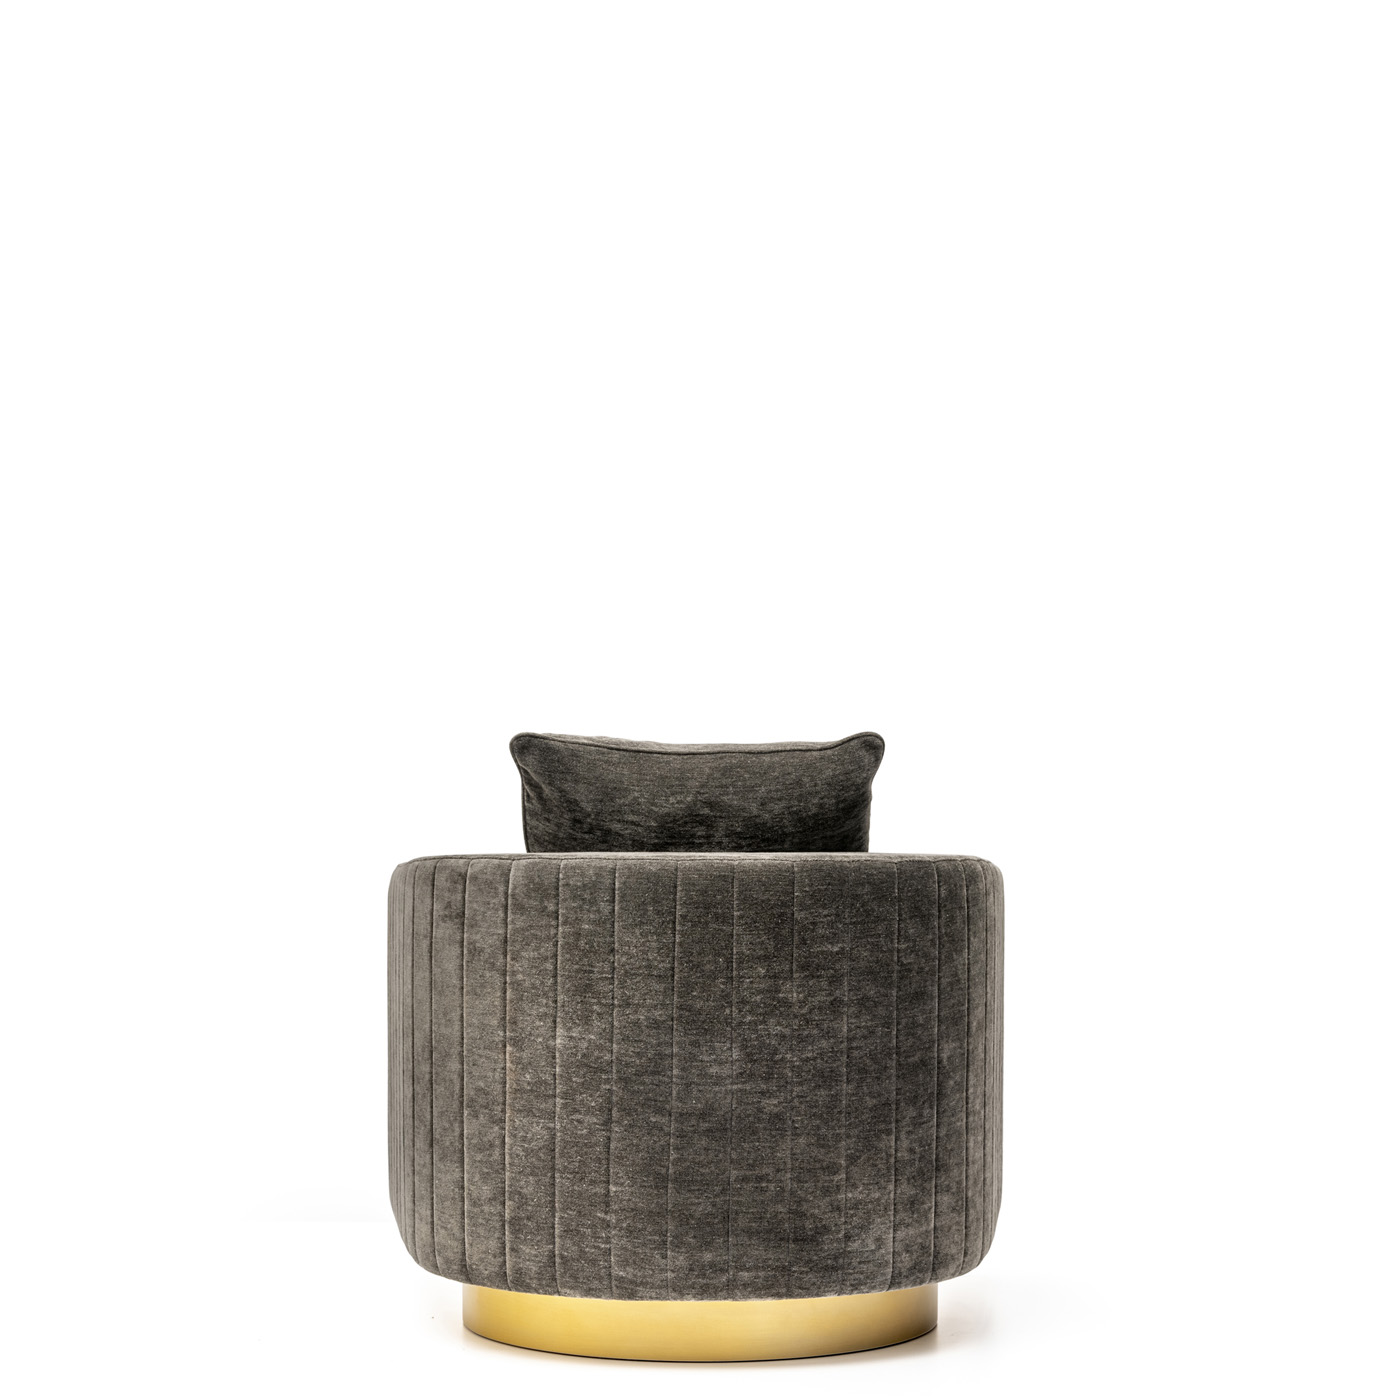 Sofas and seats - Afrodite armchair in Belsuede fabric with horn armrests - back - Arcahorn